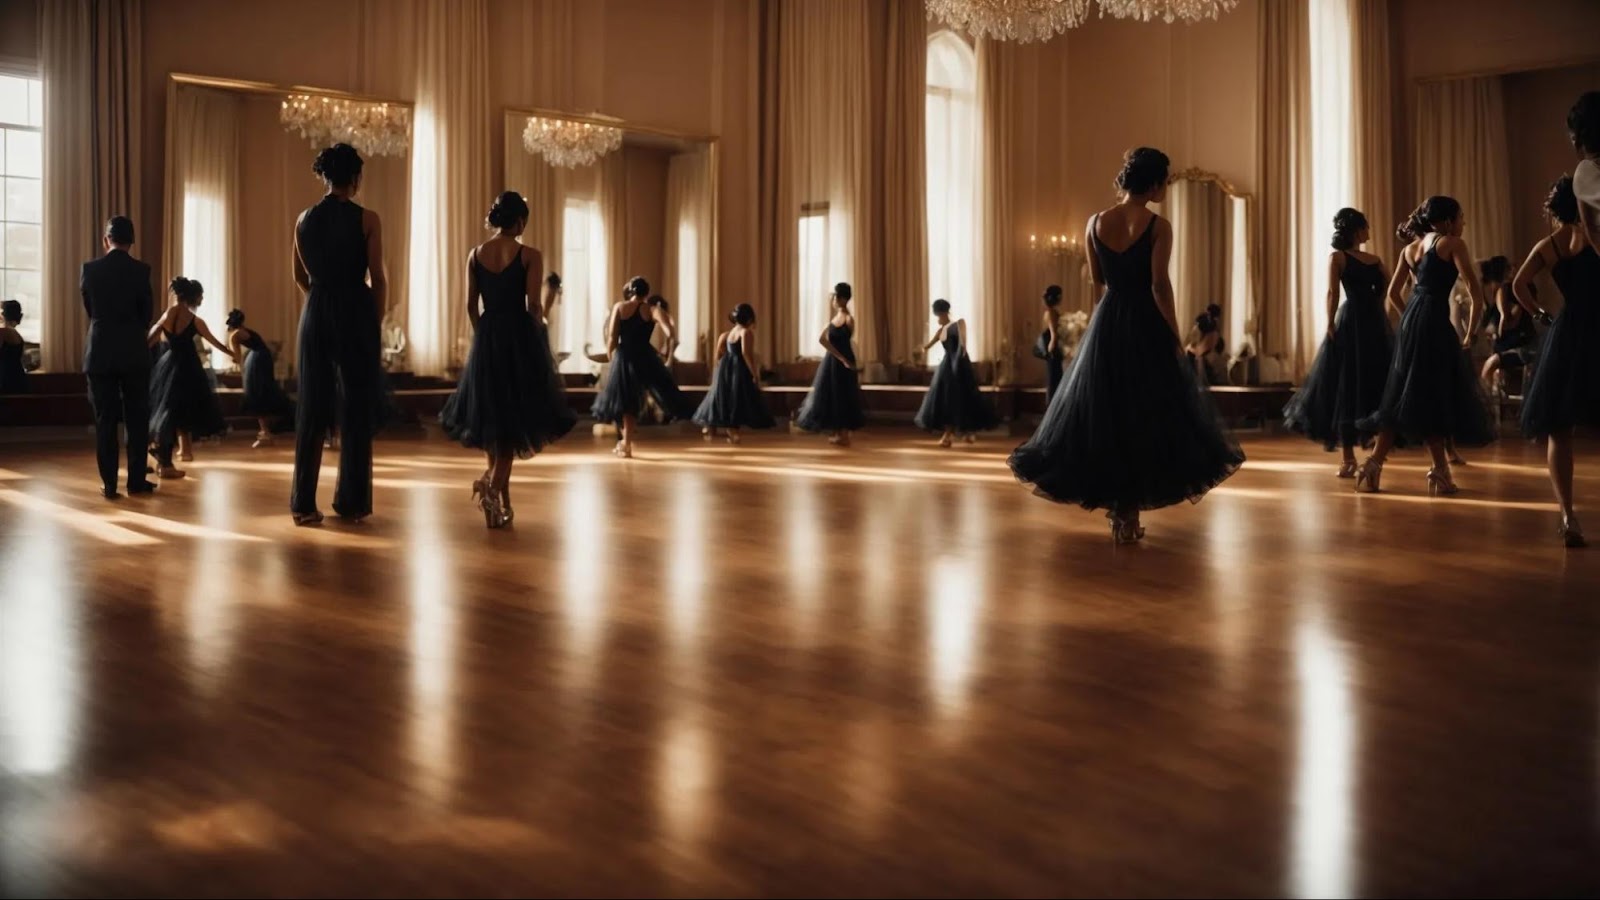 a spacious, gleaming ballroom filled with mirrors reflects the silhouettes of eager dancers positioned attentively on a polished wooden floor.